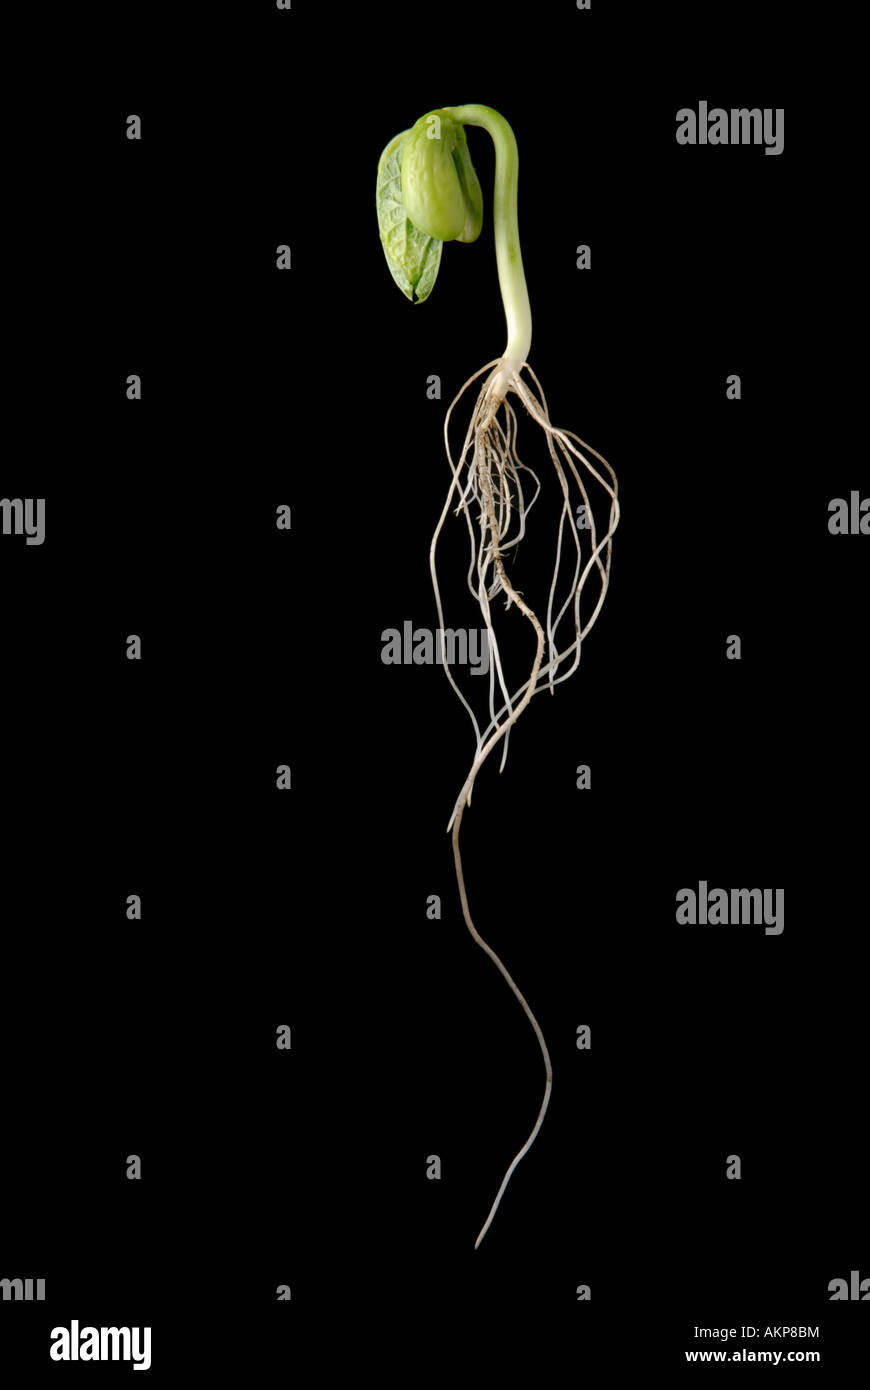 Pea seedling with roots Stock Photo